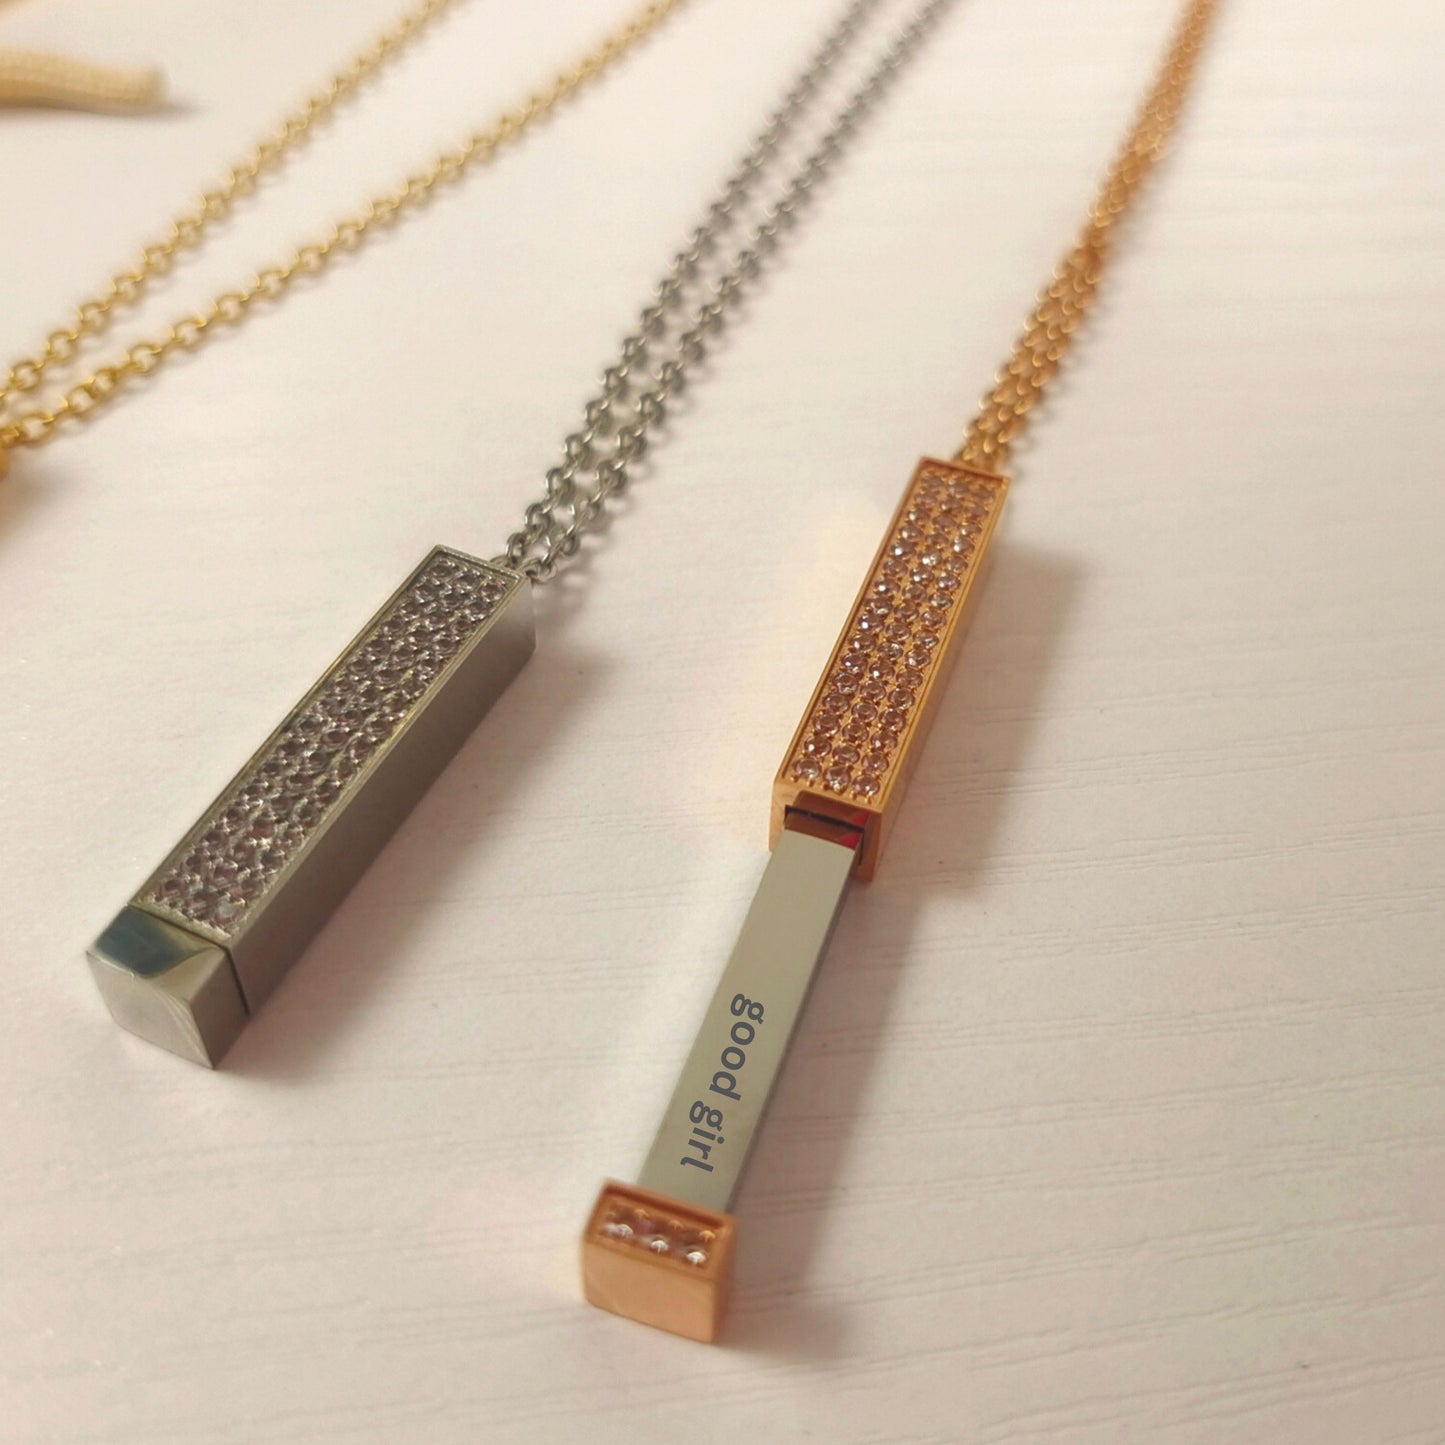 Customizable BDSM necklaces in gold and silver with good girl text